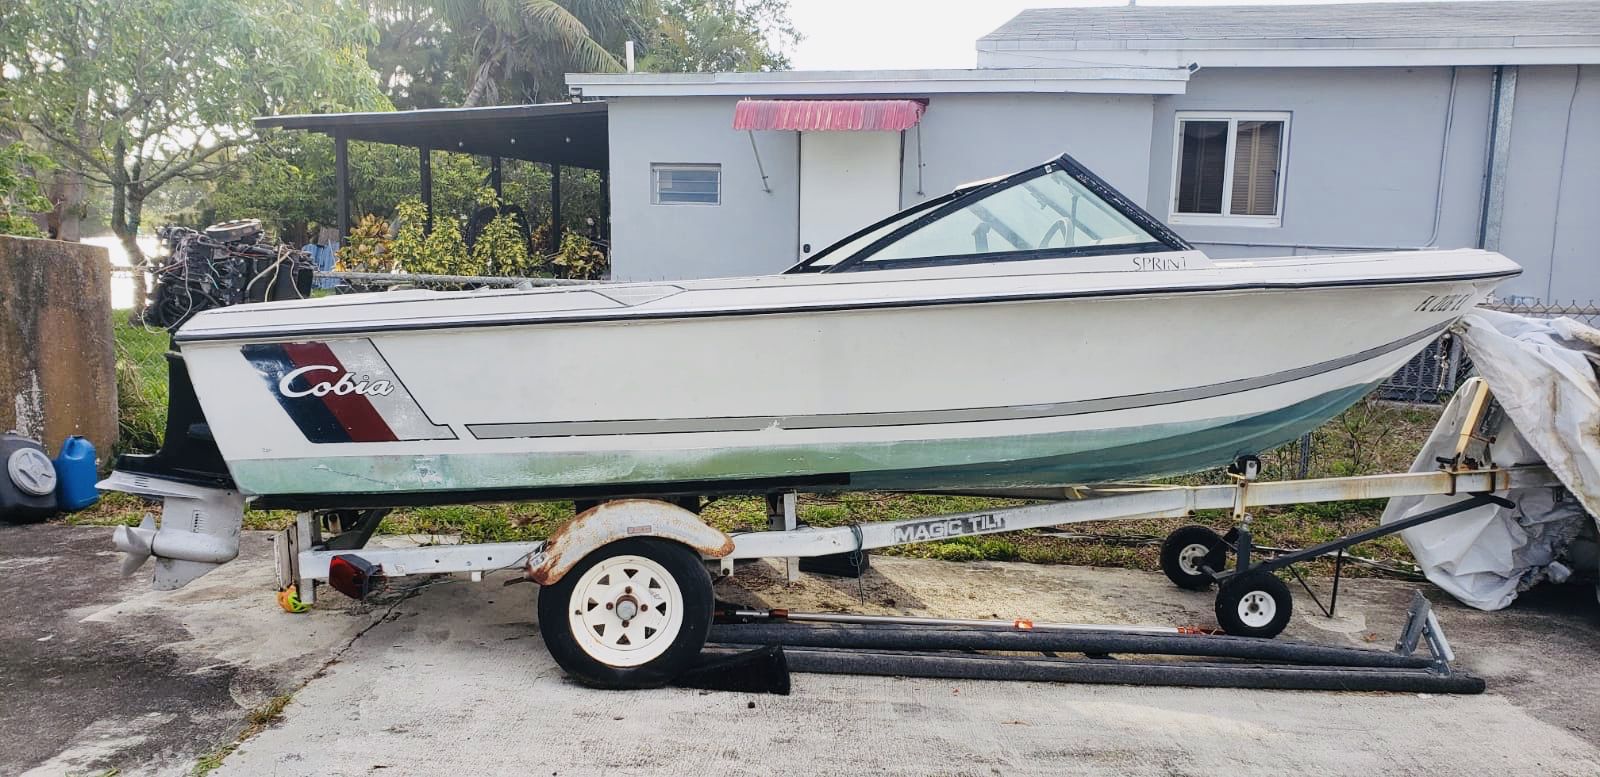 SELLING COBIA BOAT WITH TRAILER ONLY $150